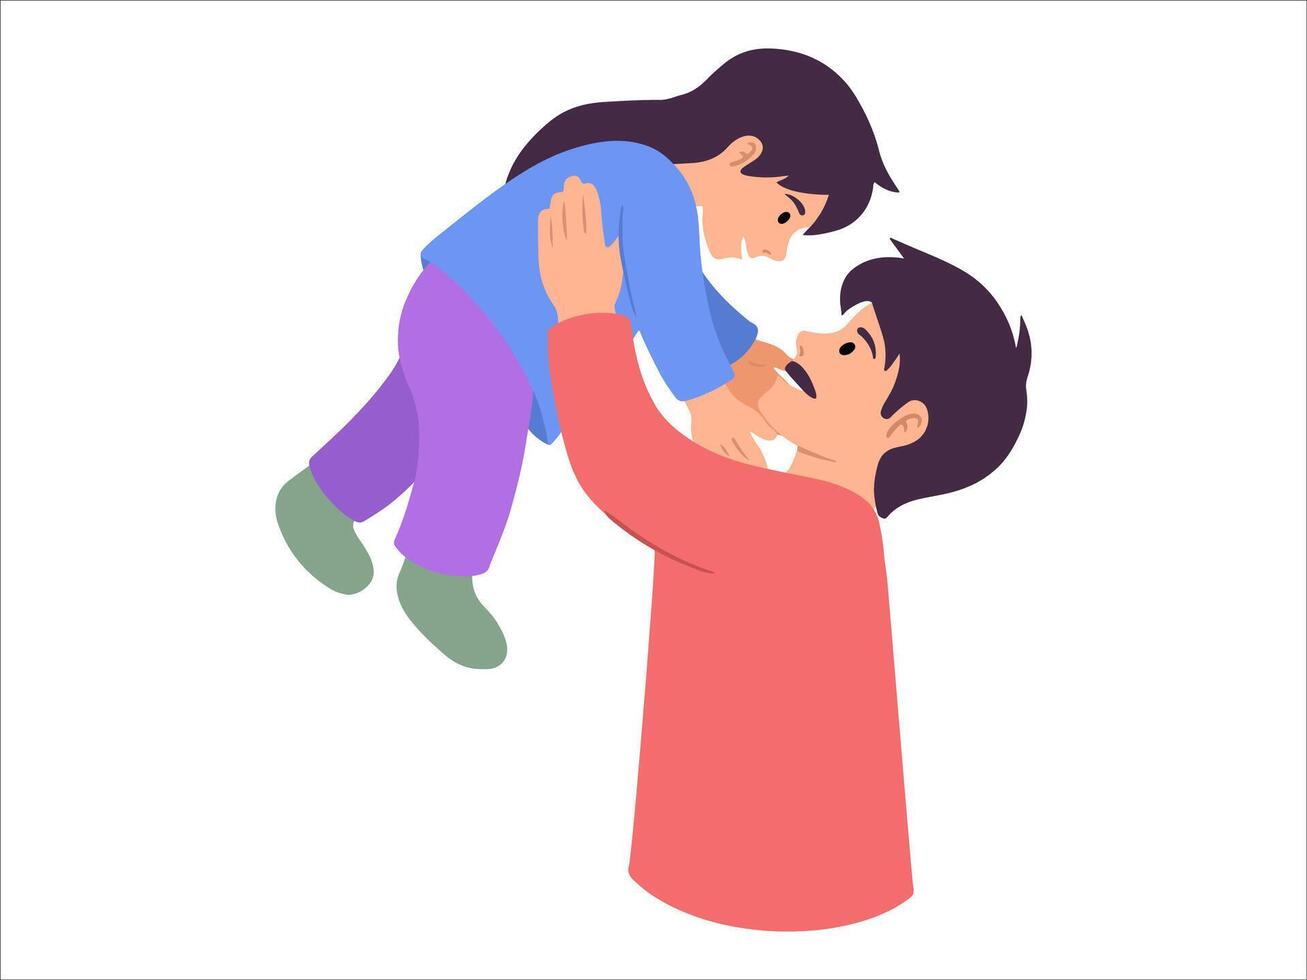 Father holding child or avatar icon illustration vector